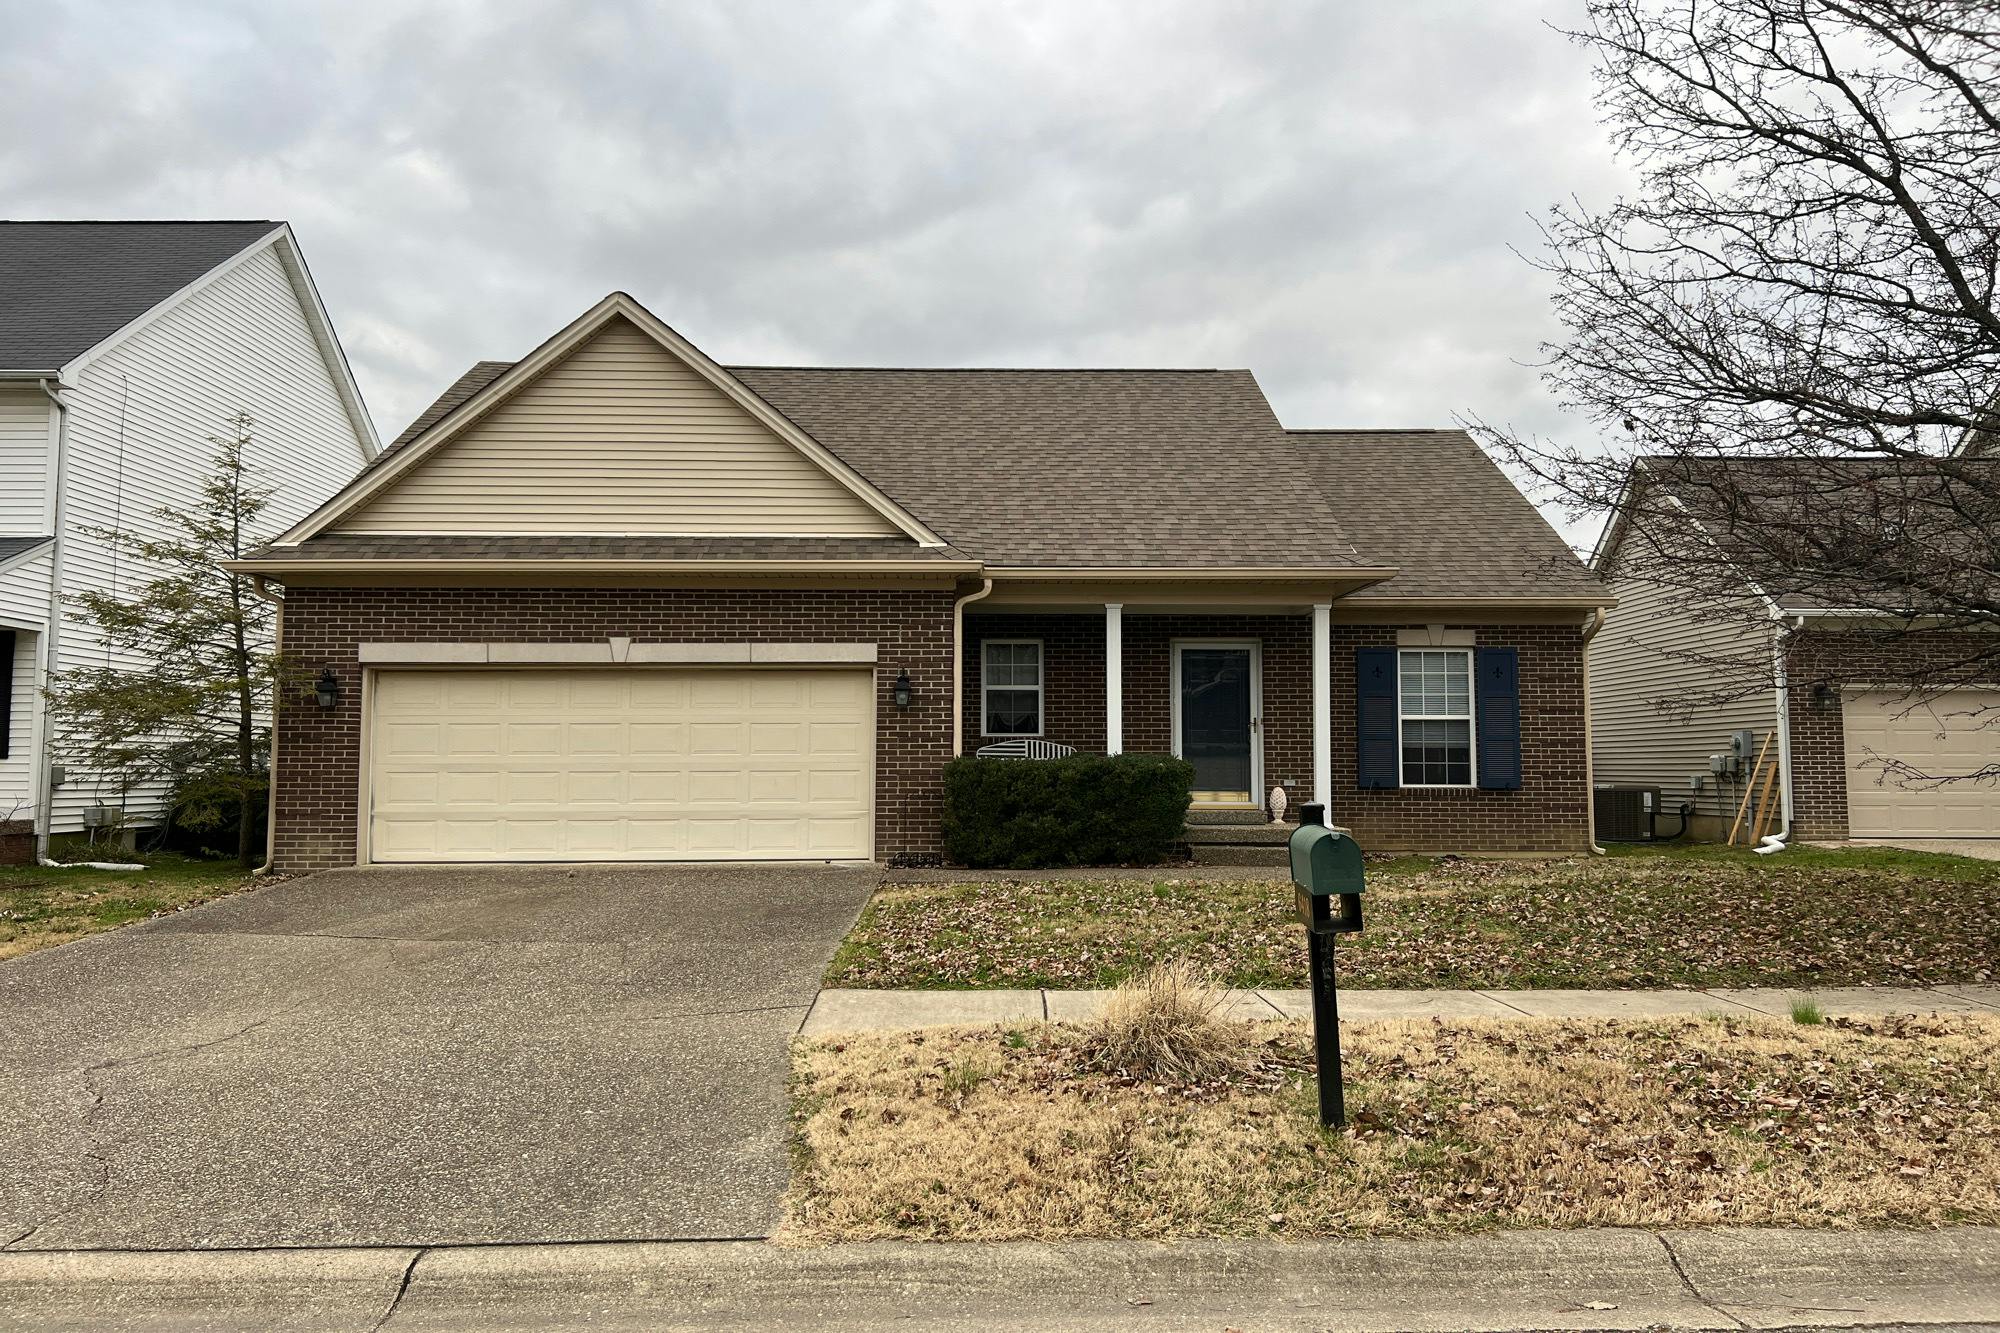 Tradesmill Dr, Louisville, KY 40291